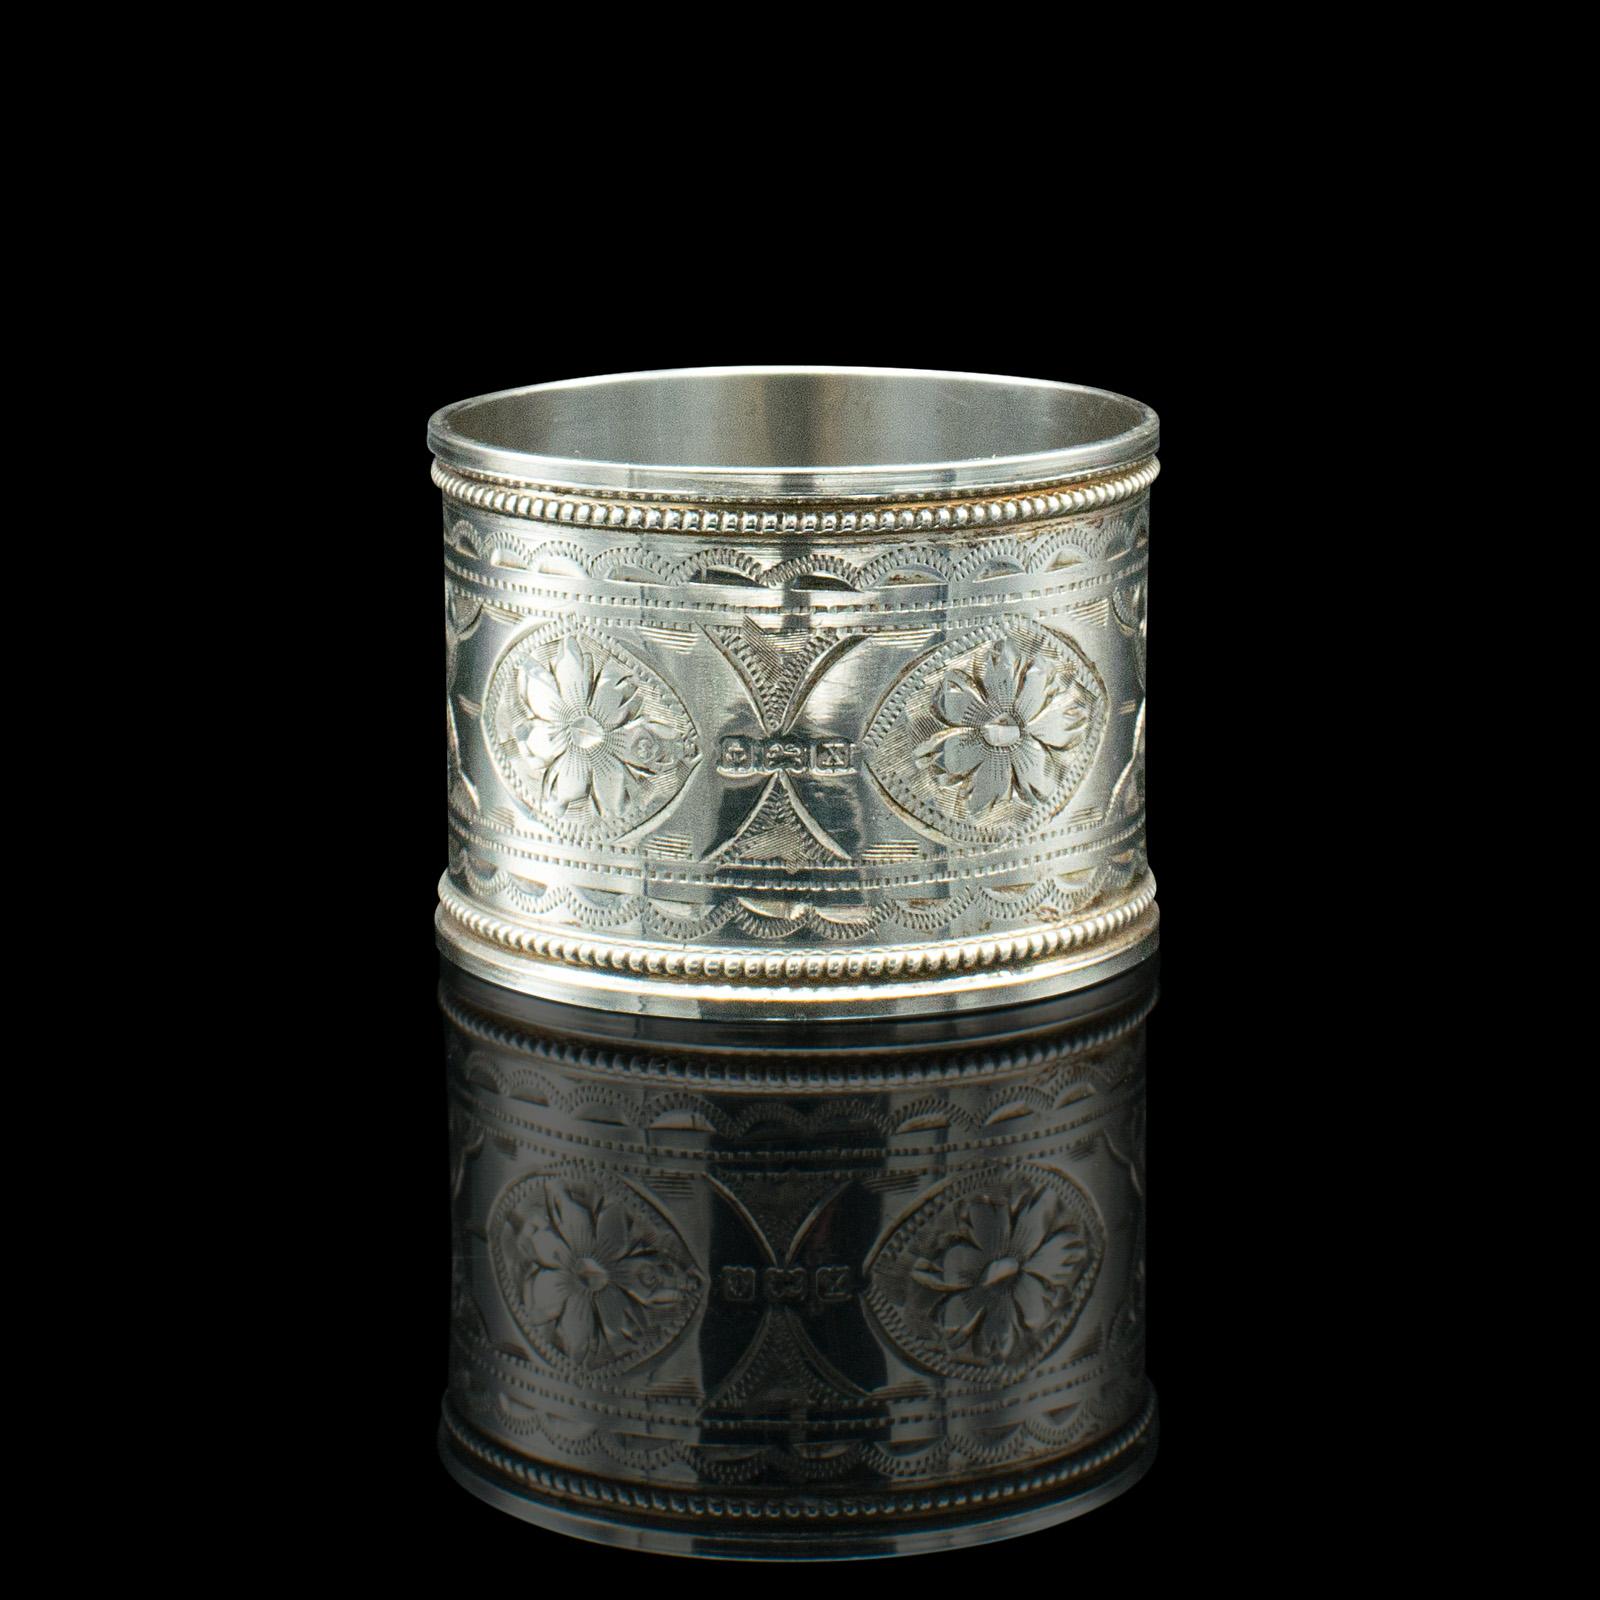 Antique Napkin Ring, English Sterling Silver, Table Decor, Hallmarked, Date 1922 In Good Condition For Sale In Hele, Devon, GB